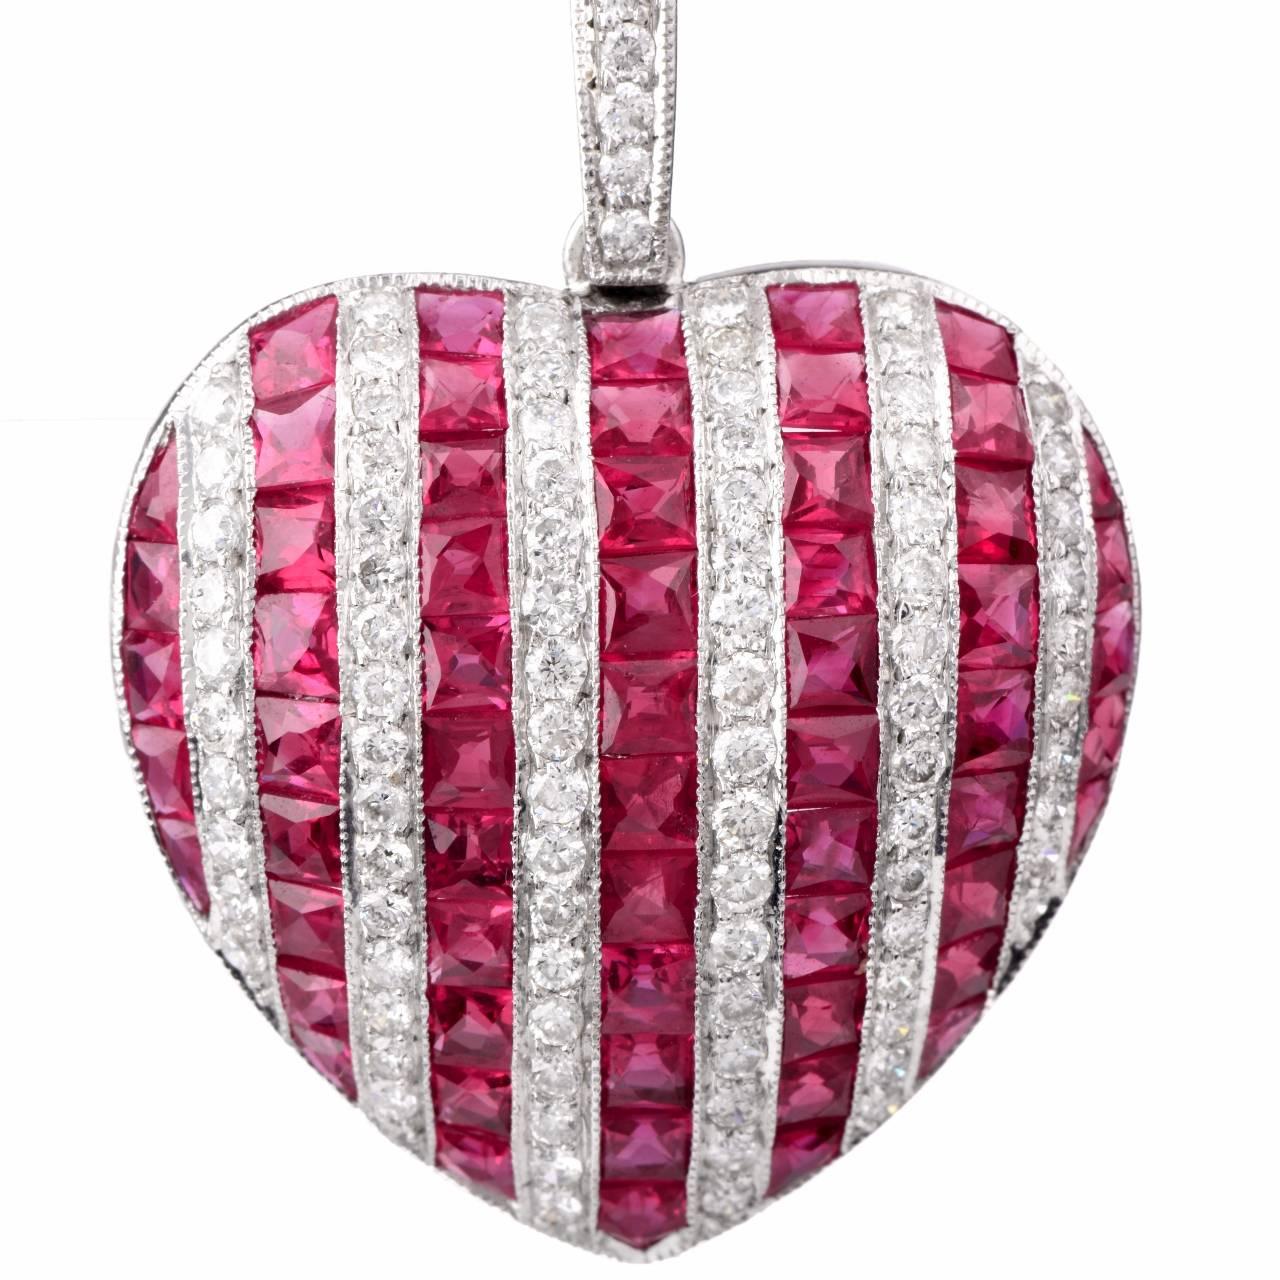 This captivating estate pendant is crafted in solid 18K white gold. Designed as an enchanting diamond and ruby encrusted heart motif profile, this vividly colored pendant is adorned with 4.45 cts of crimson-red color, French square-cut rubies,